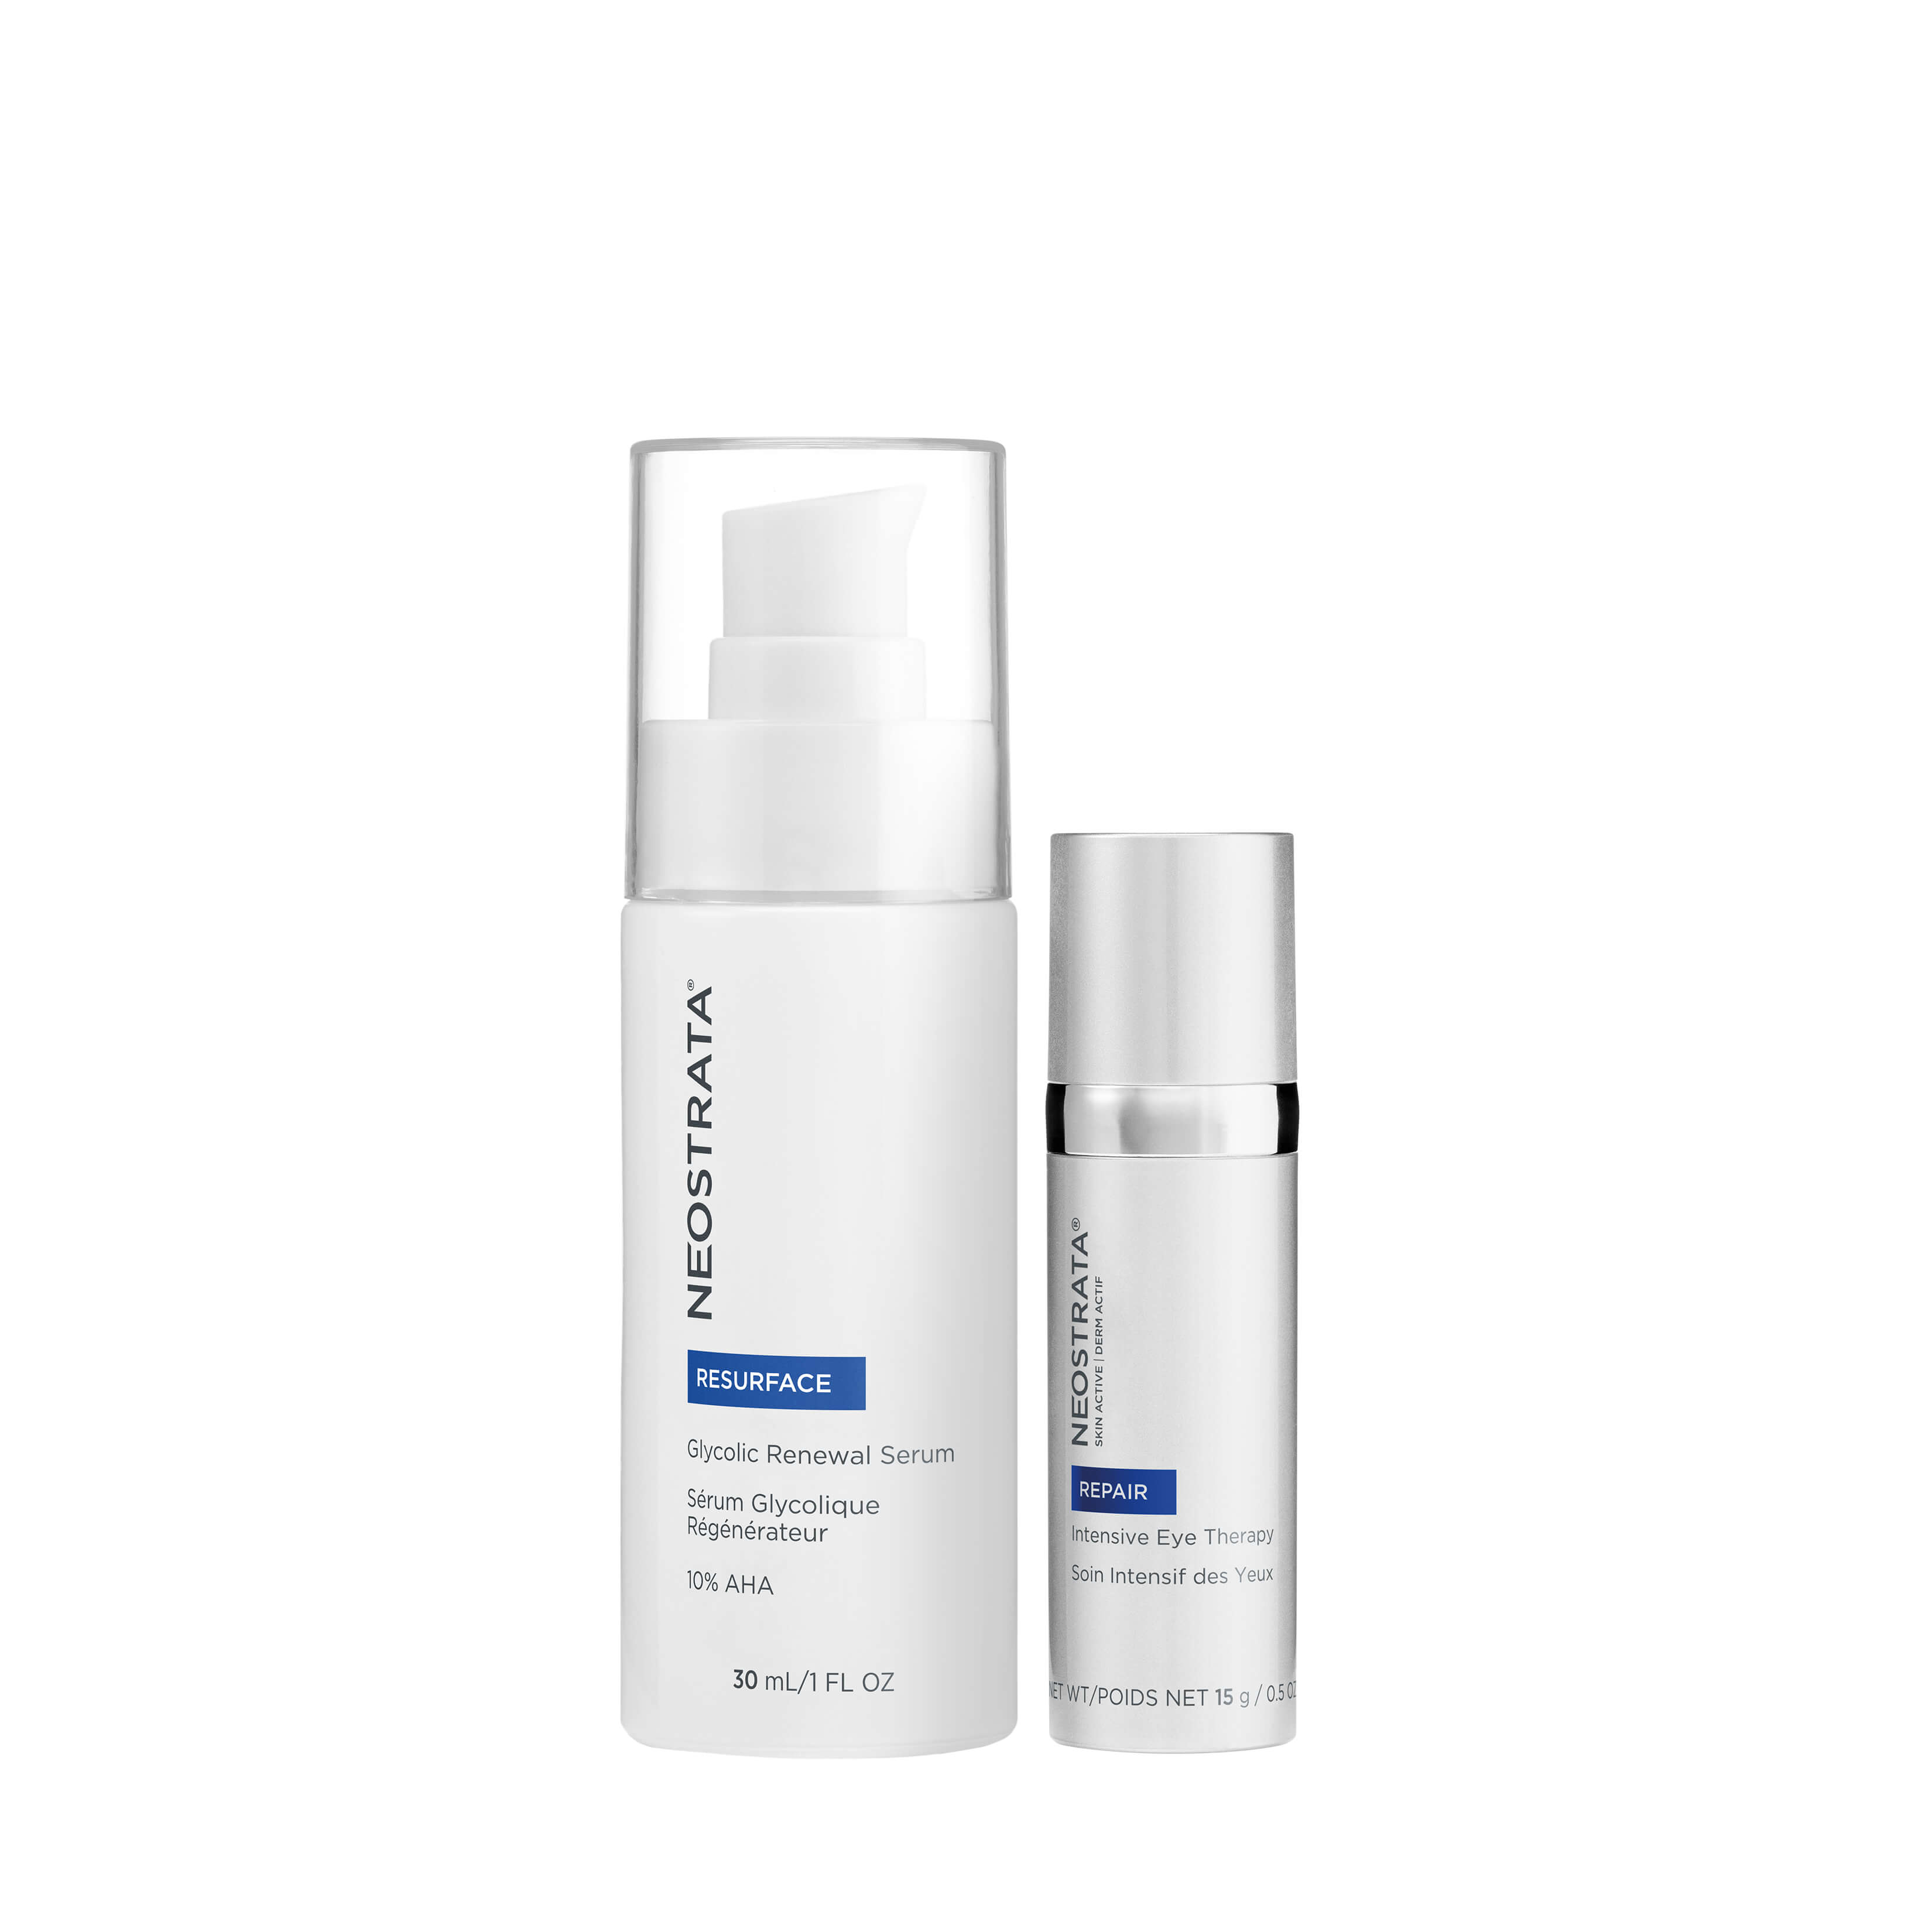 NeoStrata | The Combines A Powerful Face Serum With Our Most Popular Eye Cream To Target Improved Overall Skin Quality, With An Extra Focus On The Eye